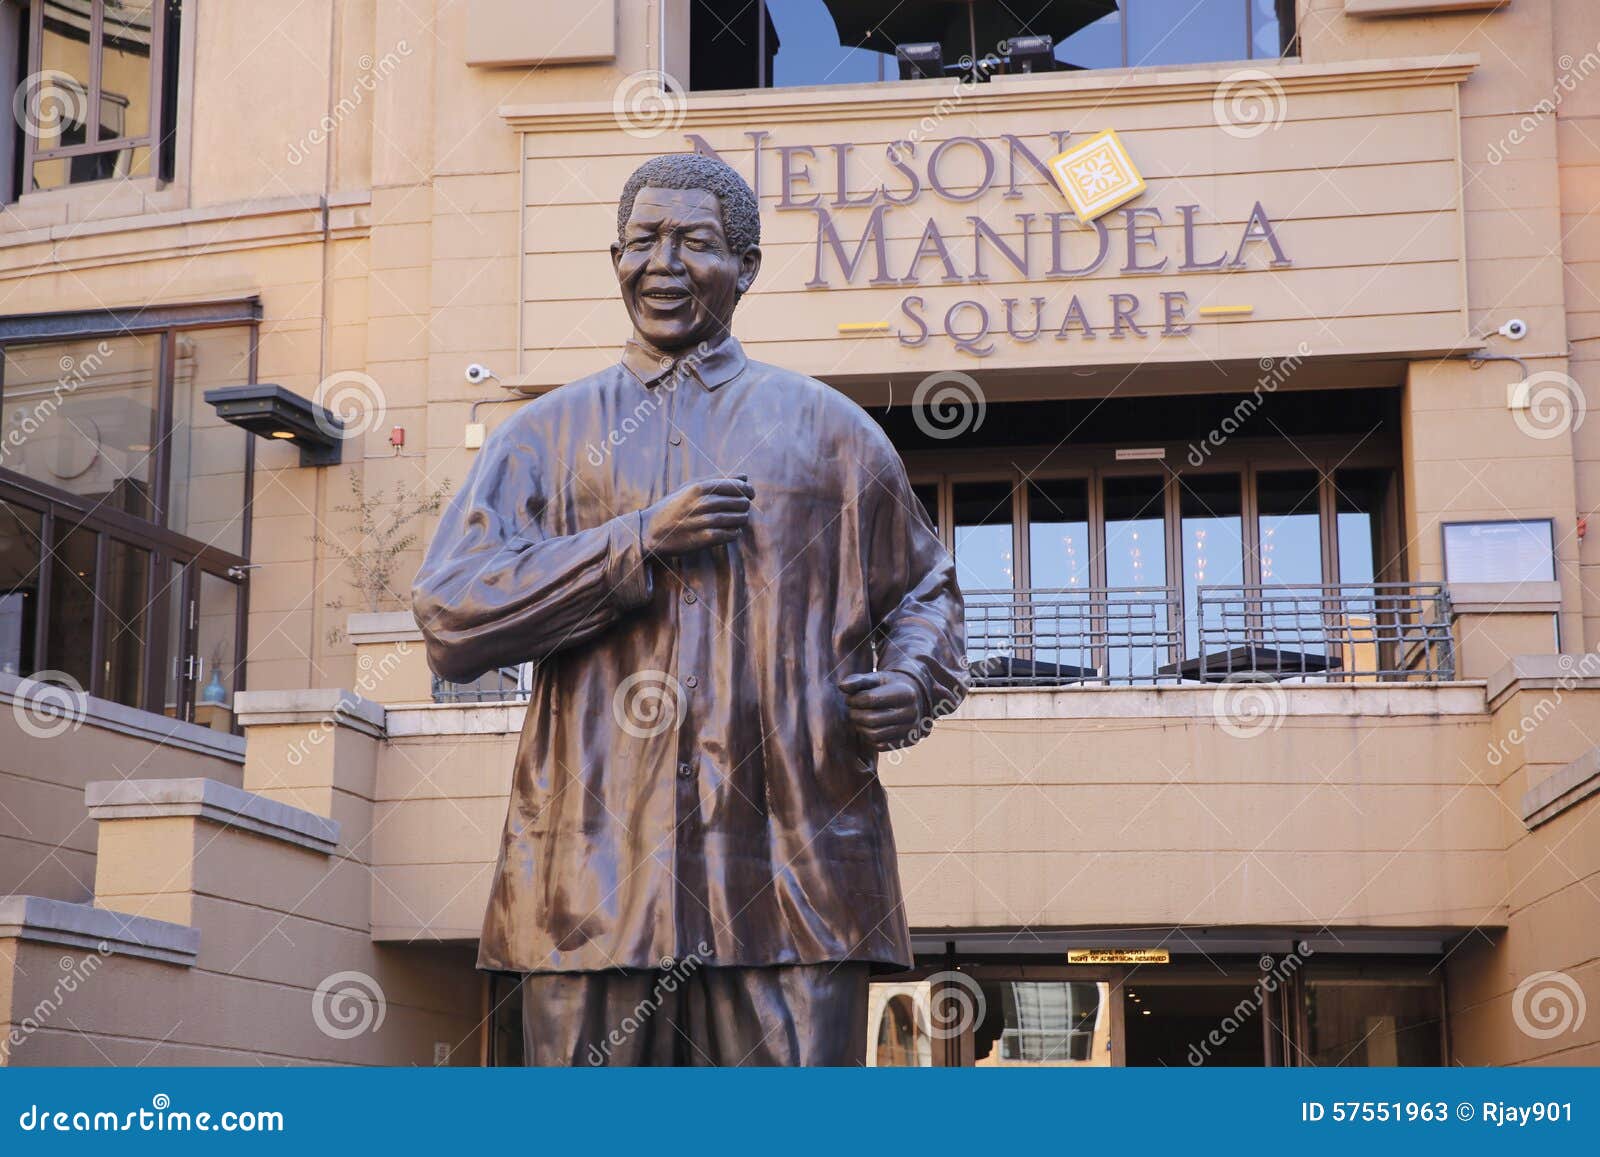 Nelson Mandela Statue editorial stock photo. Image of cultural - 57551963